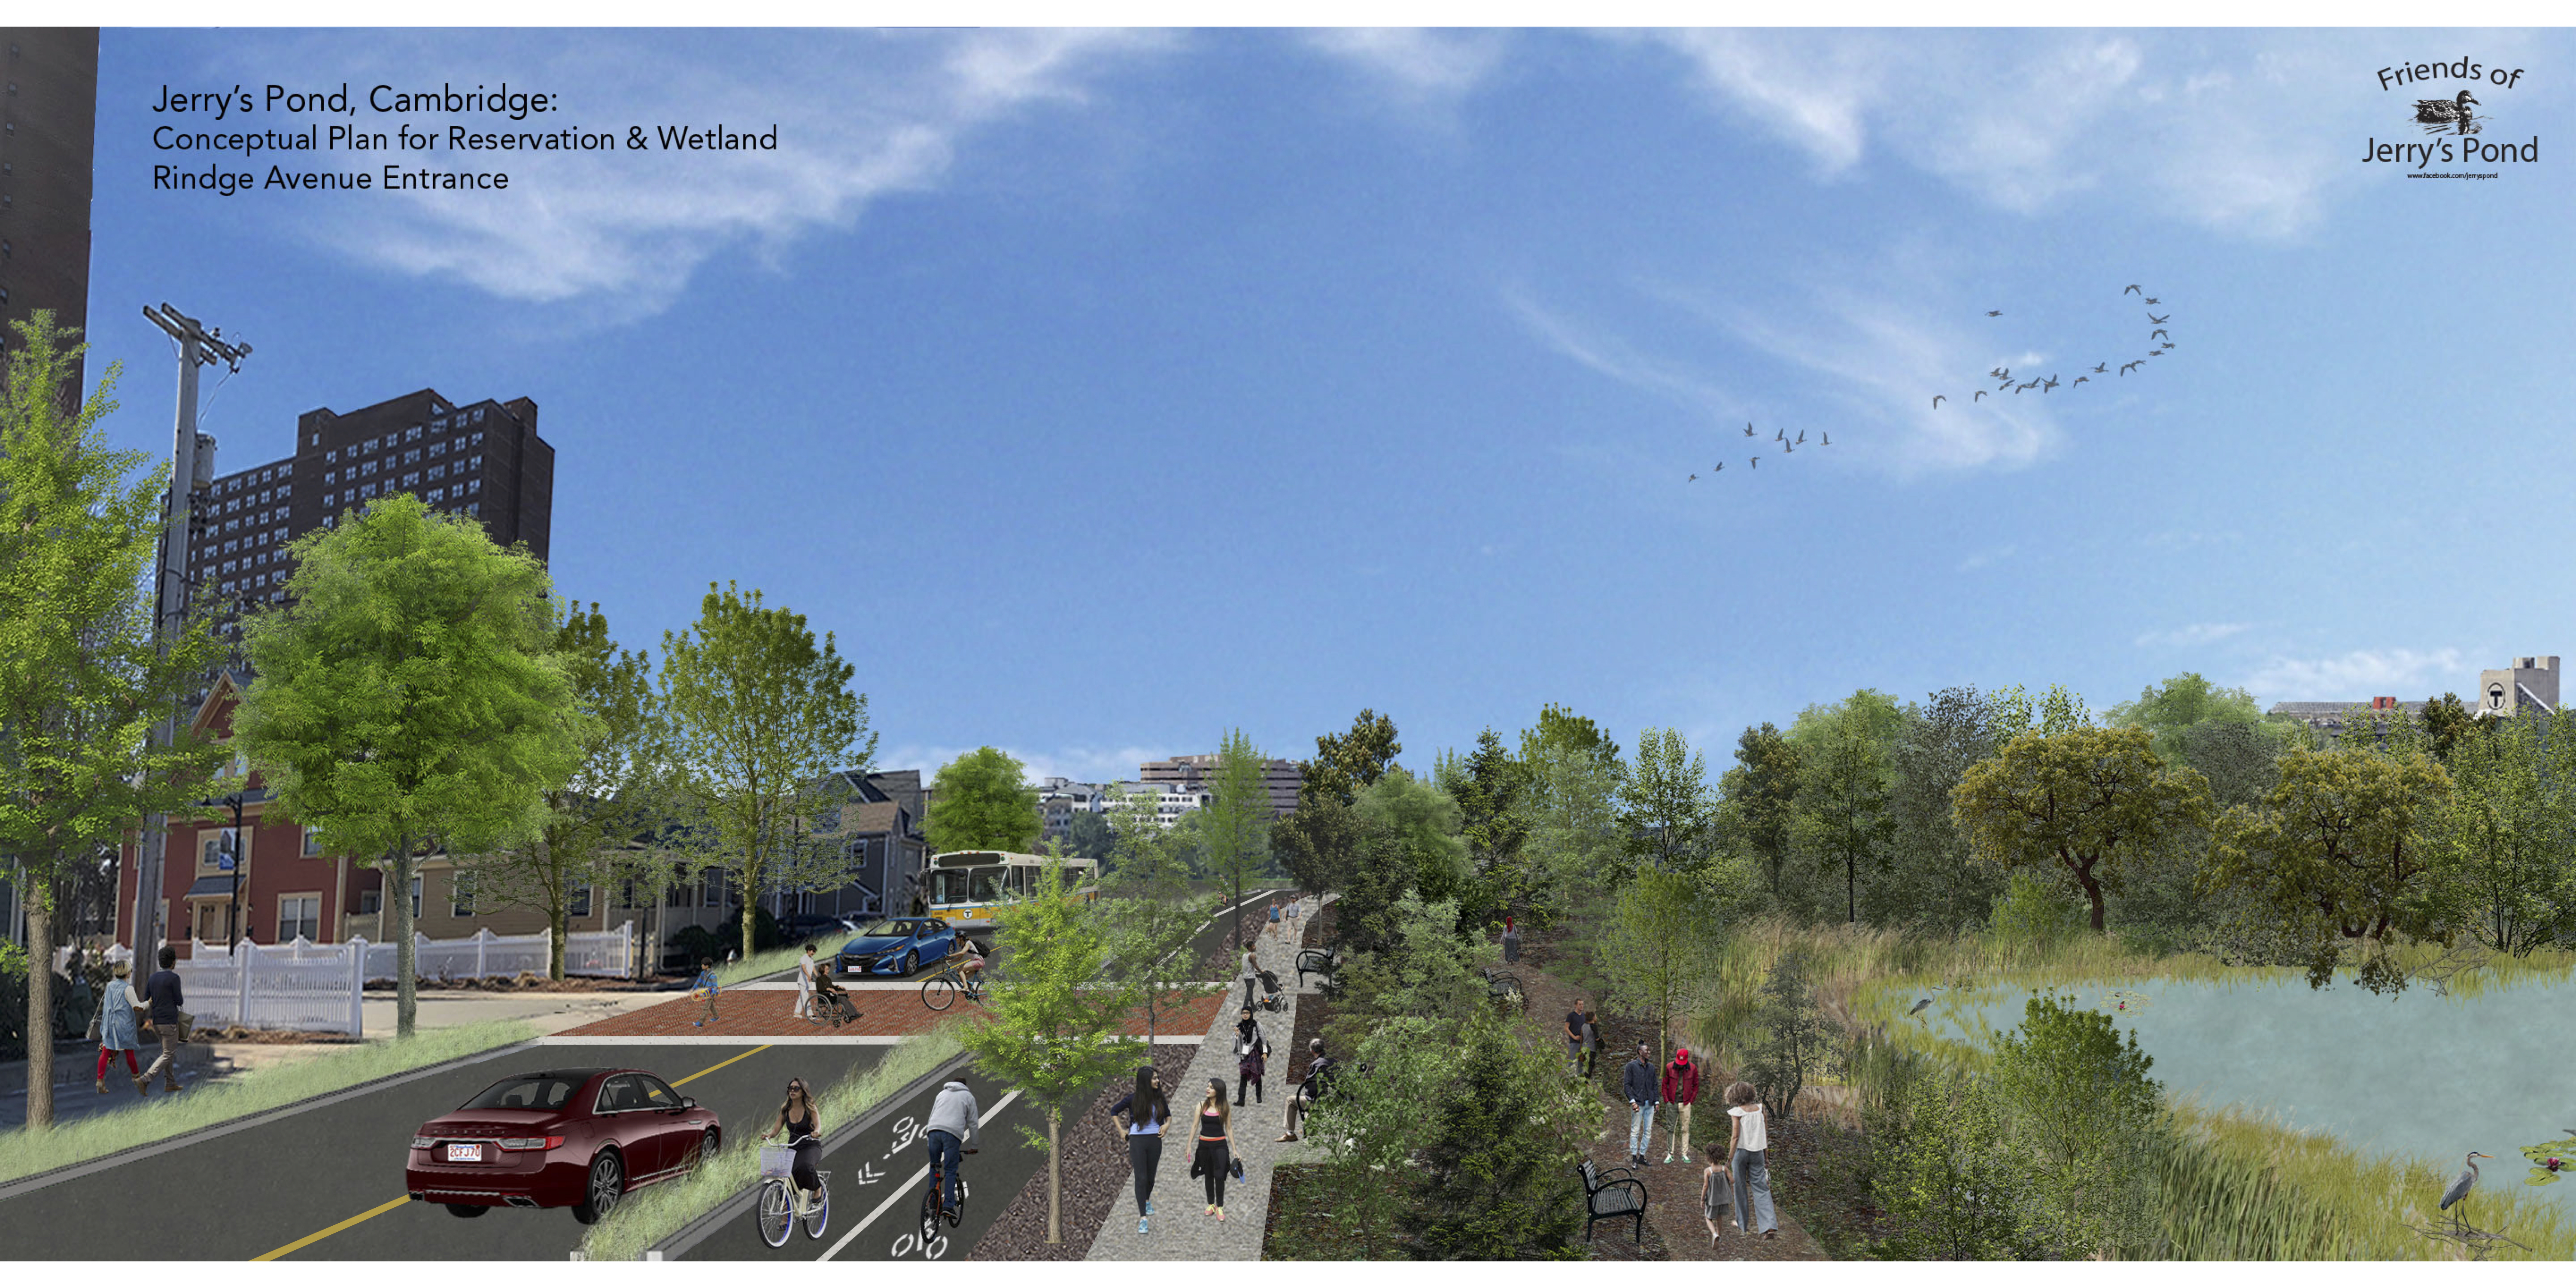 Architectural rendering of Jerry's Pond showing naturalized wetland shore, people enjoying protected bike lane, and green space along the road.